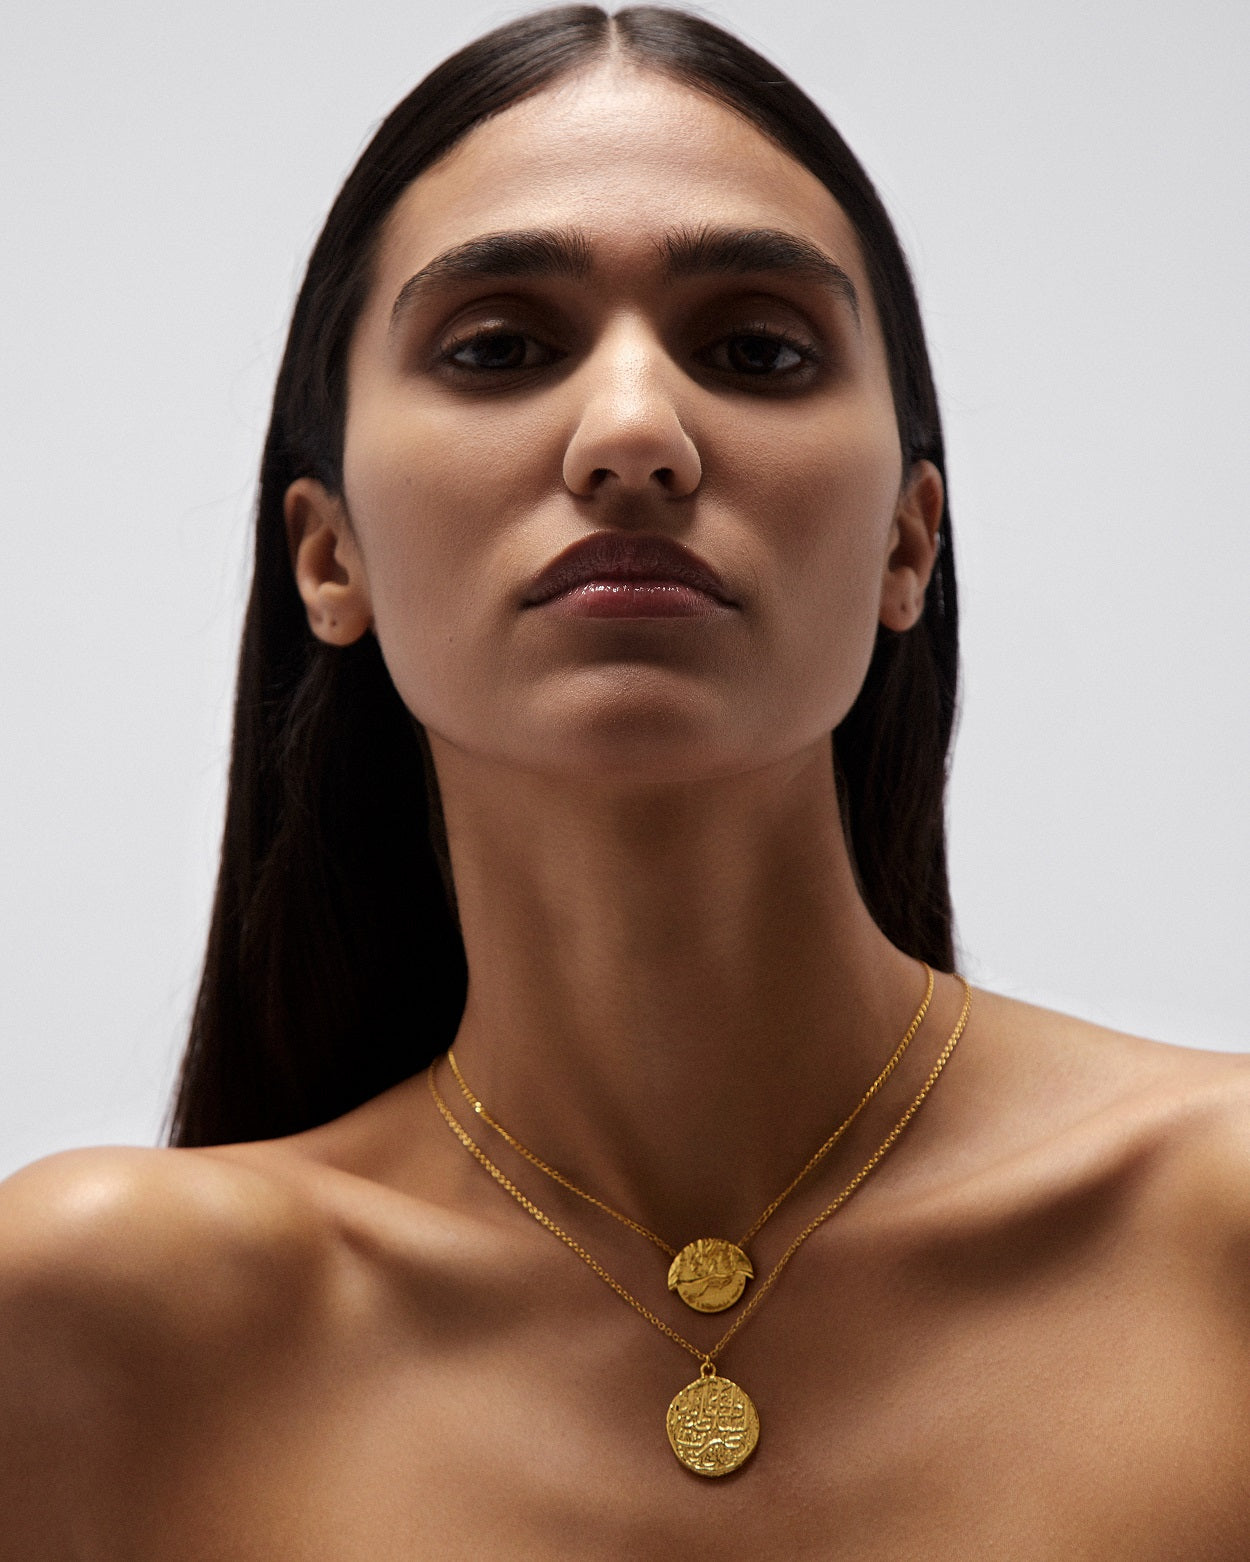 Trending Styles: How Layered Necklaces are Redefining Fashion